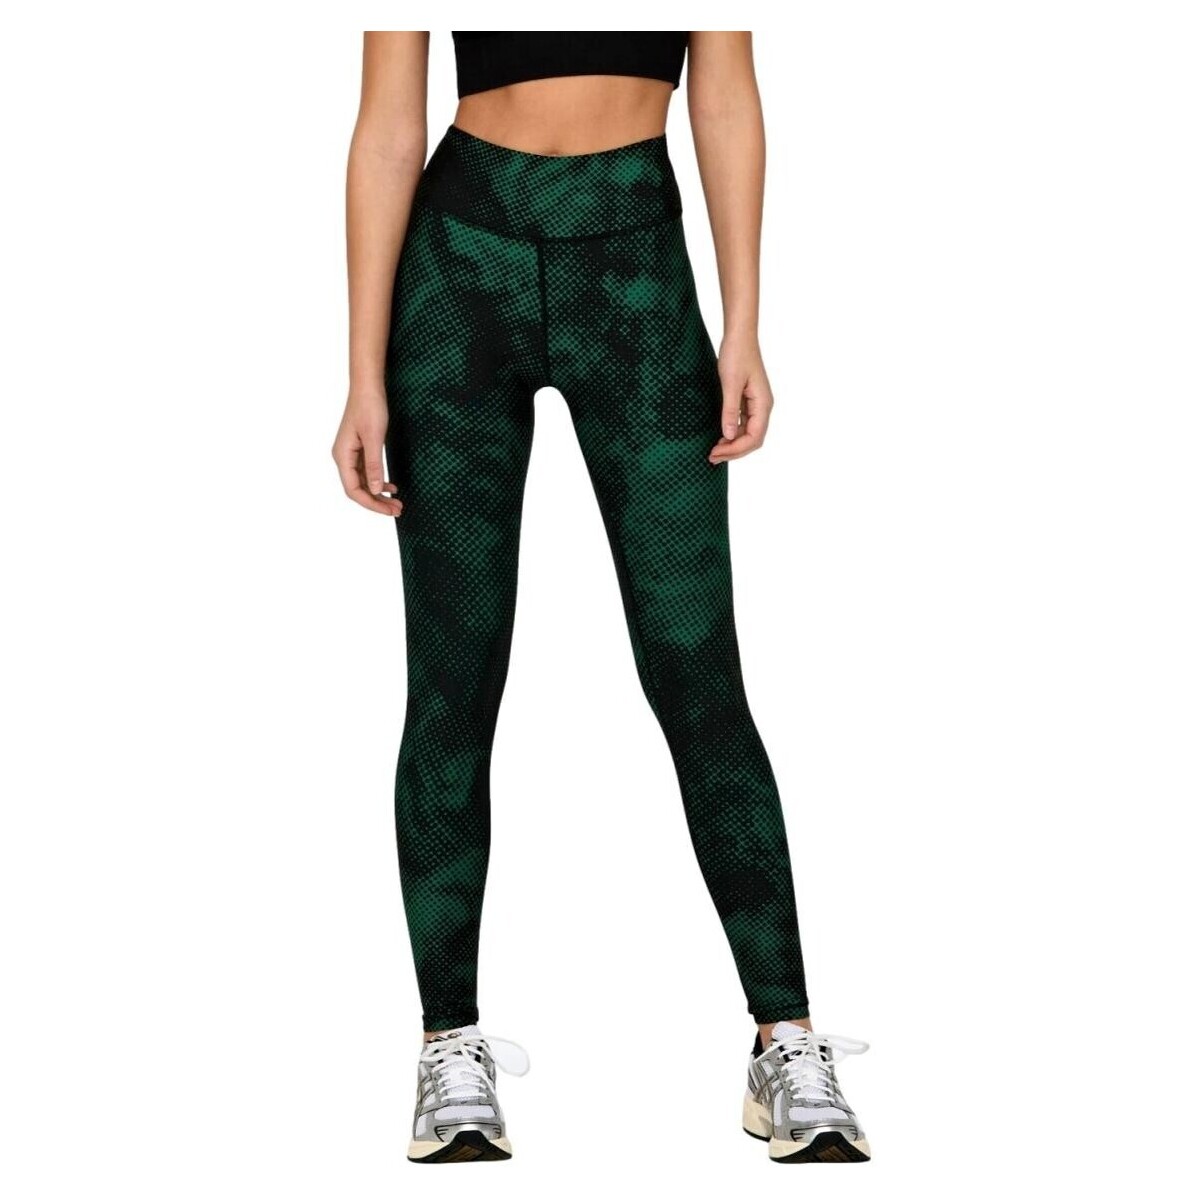 Textiel Dames Leggings Only Play MALLAS ONLY CORTE TIGHT 15306056 Groen